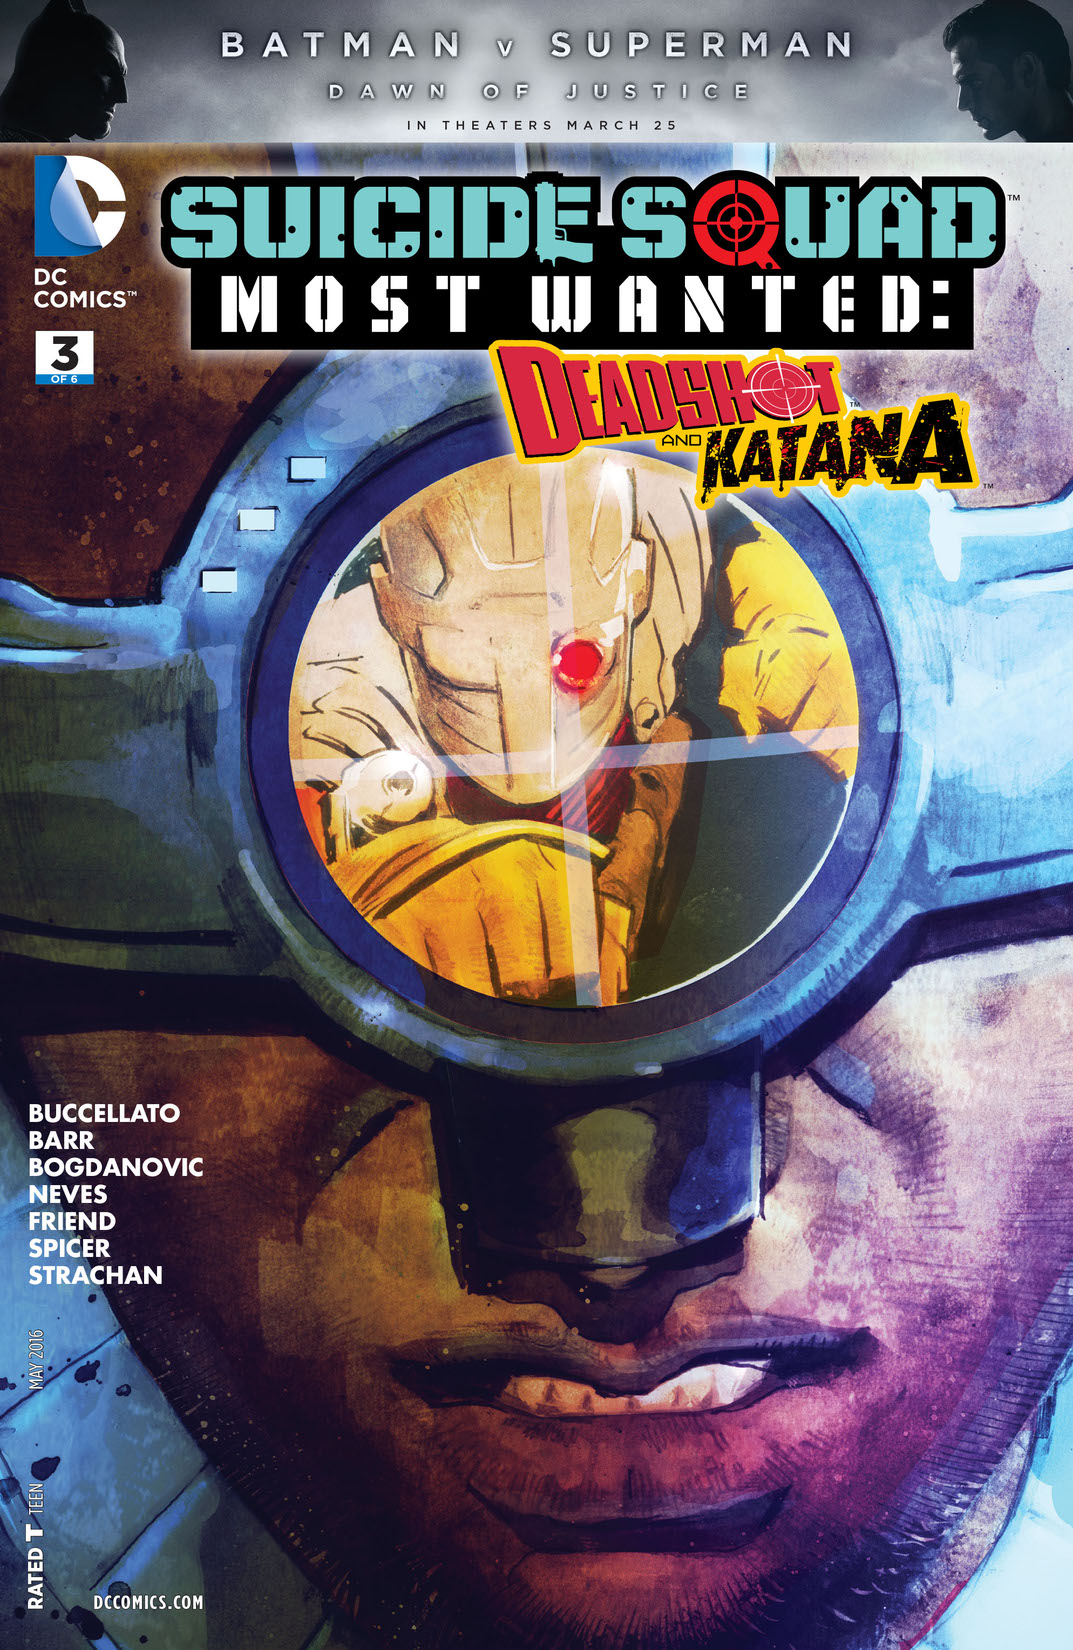 Suicide Squad Most Wanted: Deadshot and Katana #3 preview images